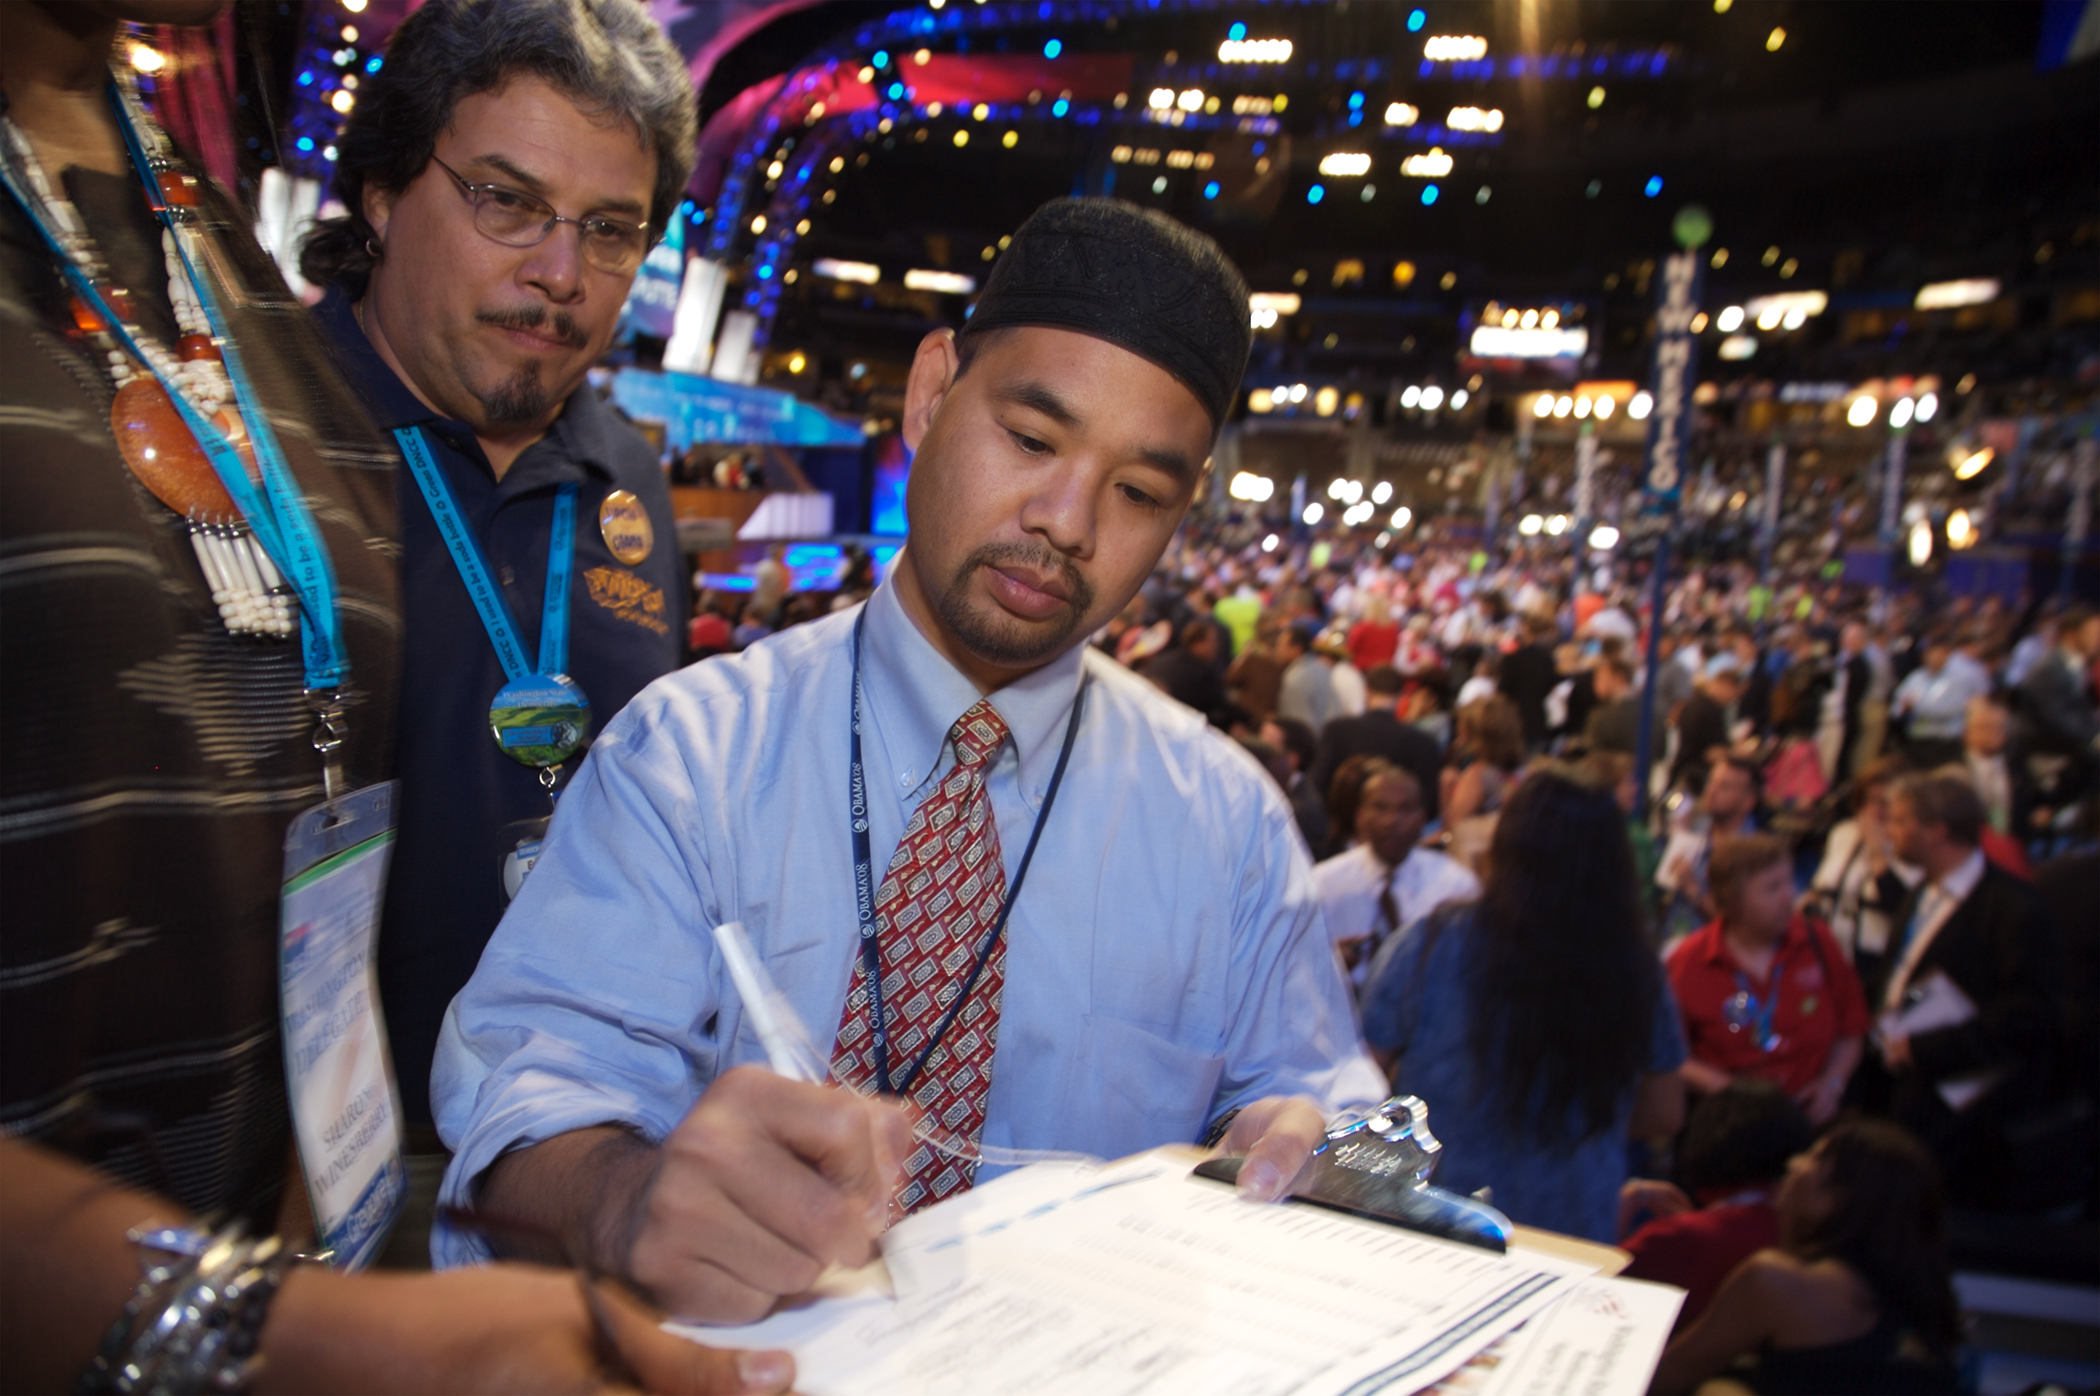 James Yee casts his ballot in favor of Barack Obama for presidential nominee of the Democratic Party. Pepsi Center, Denver CO, August 27, 2008.